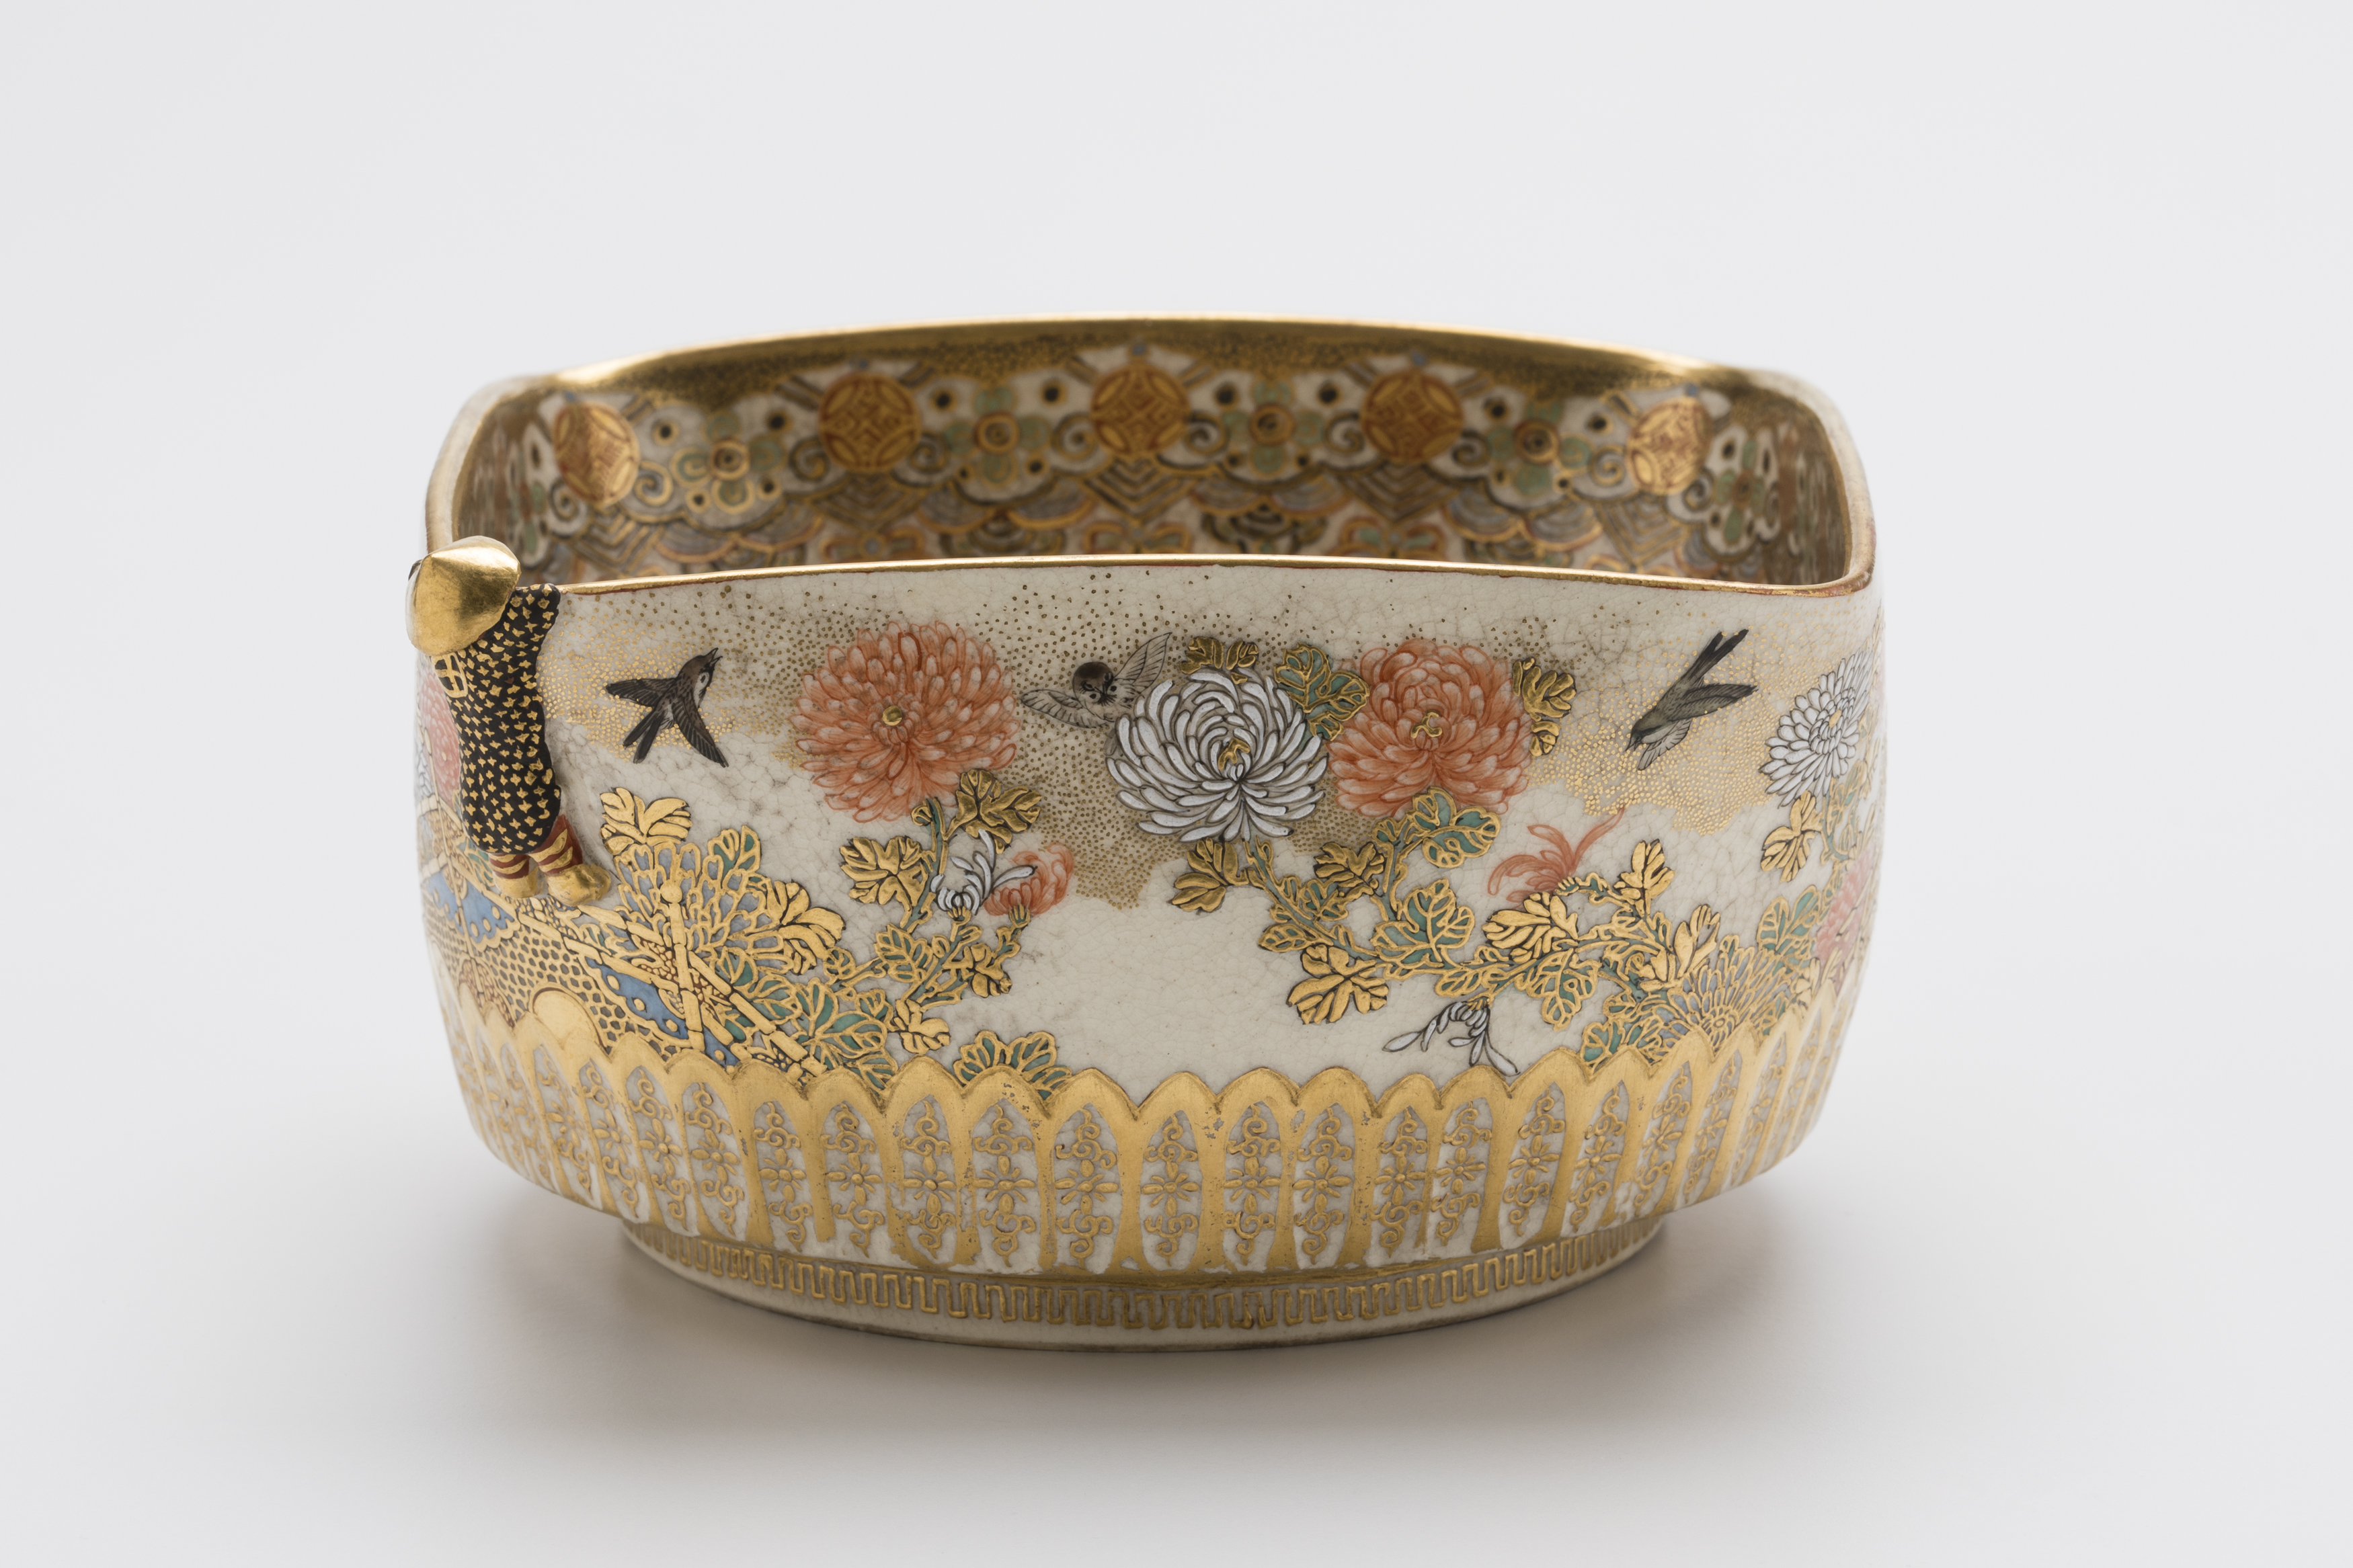 Single object image of a square shape bowl with gold decoration.